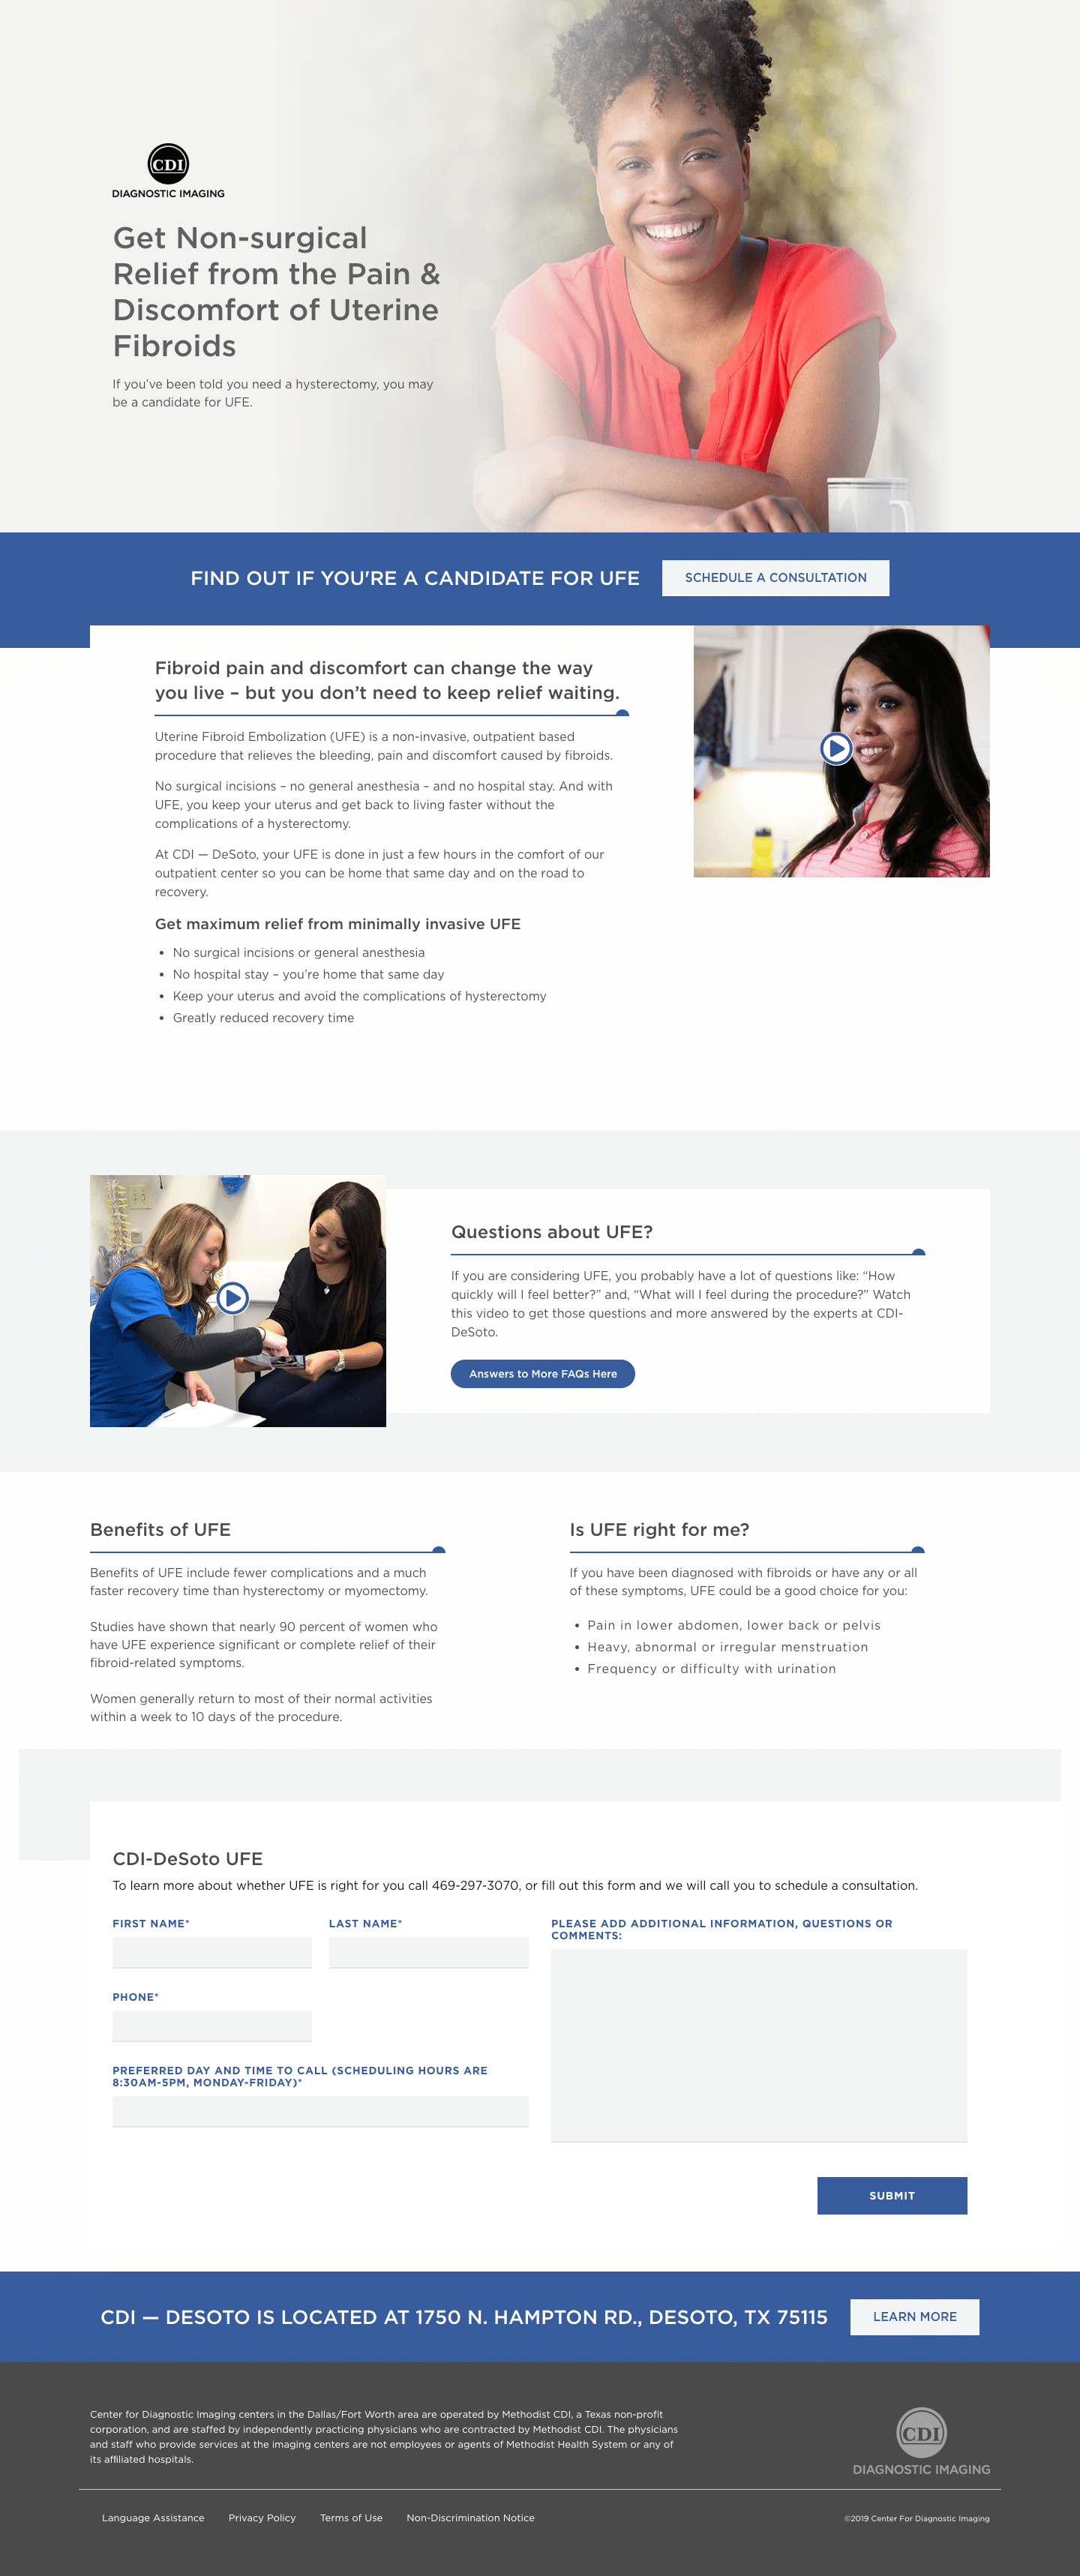 landing page template